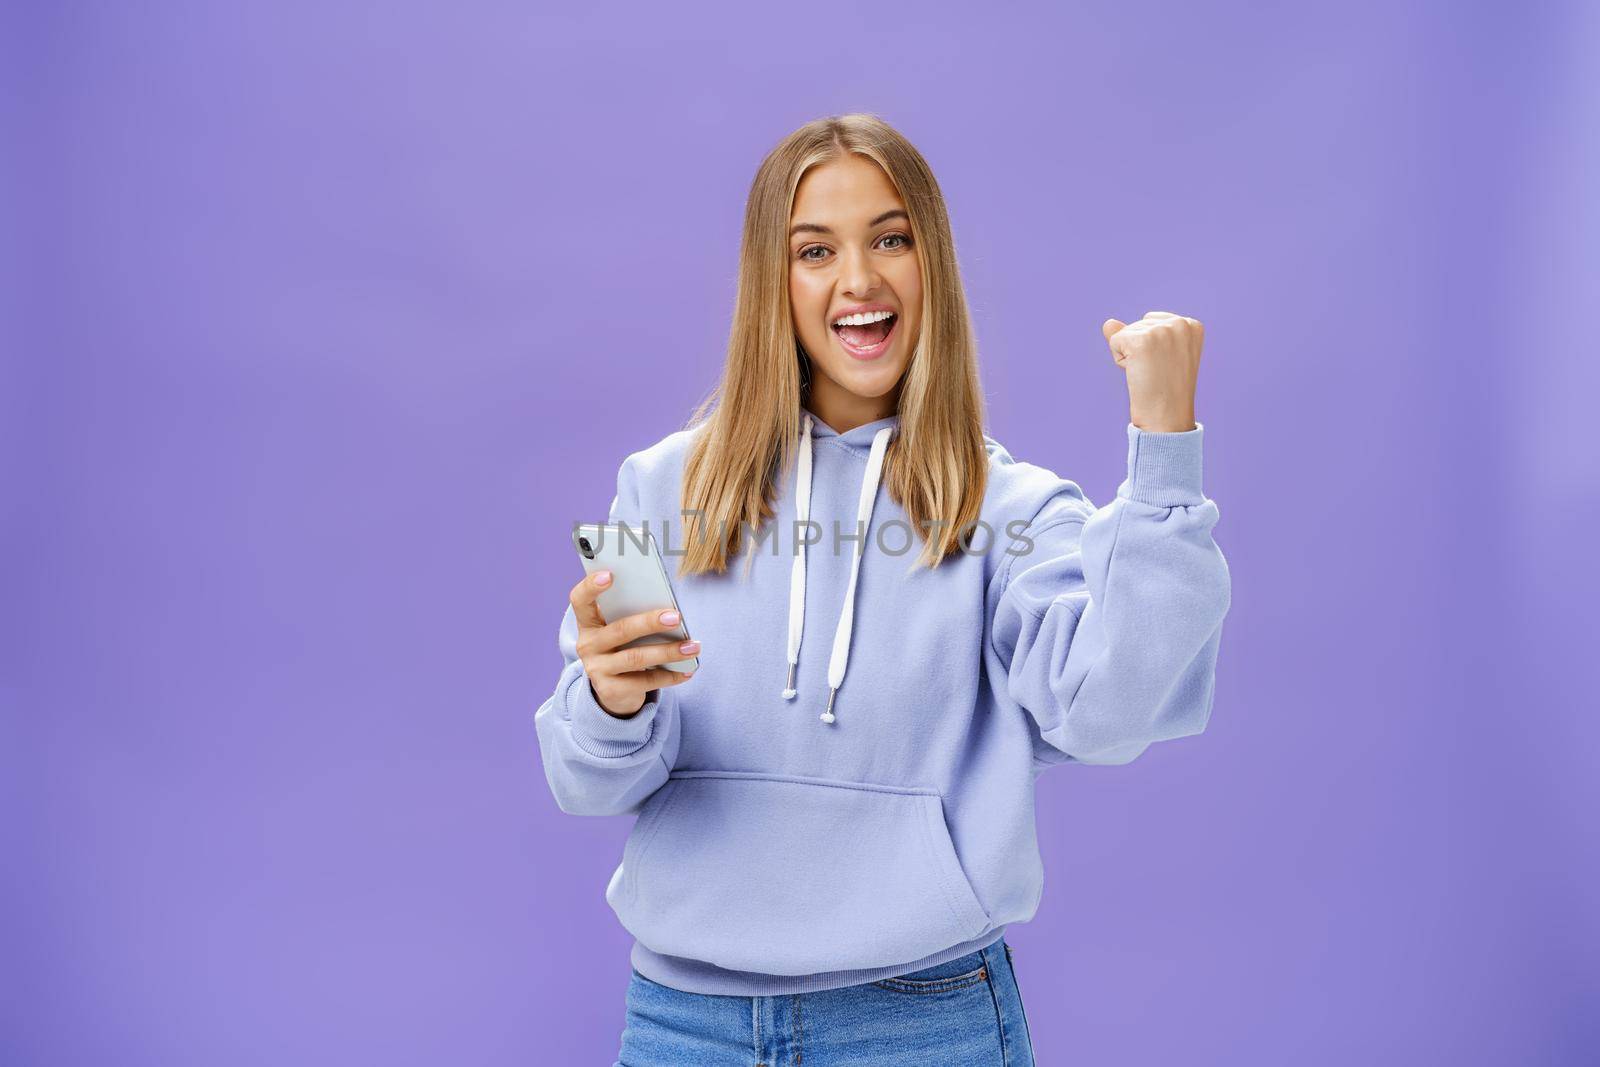 Yes we did it. Pleased excited woman in hoodie raising fist in celebration and success gesture smiling broadly triumphing holding smartphone reacting to positive news in cellphone over purple wall. Technology and emotions concept